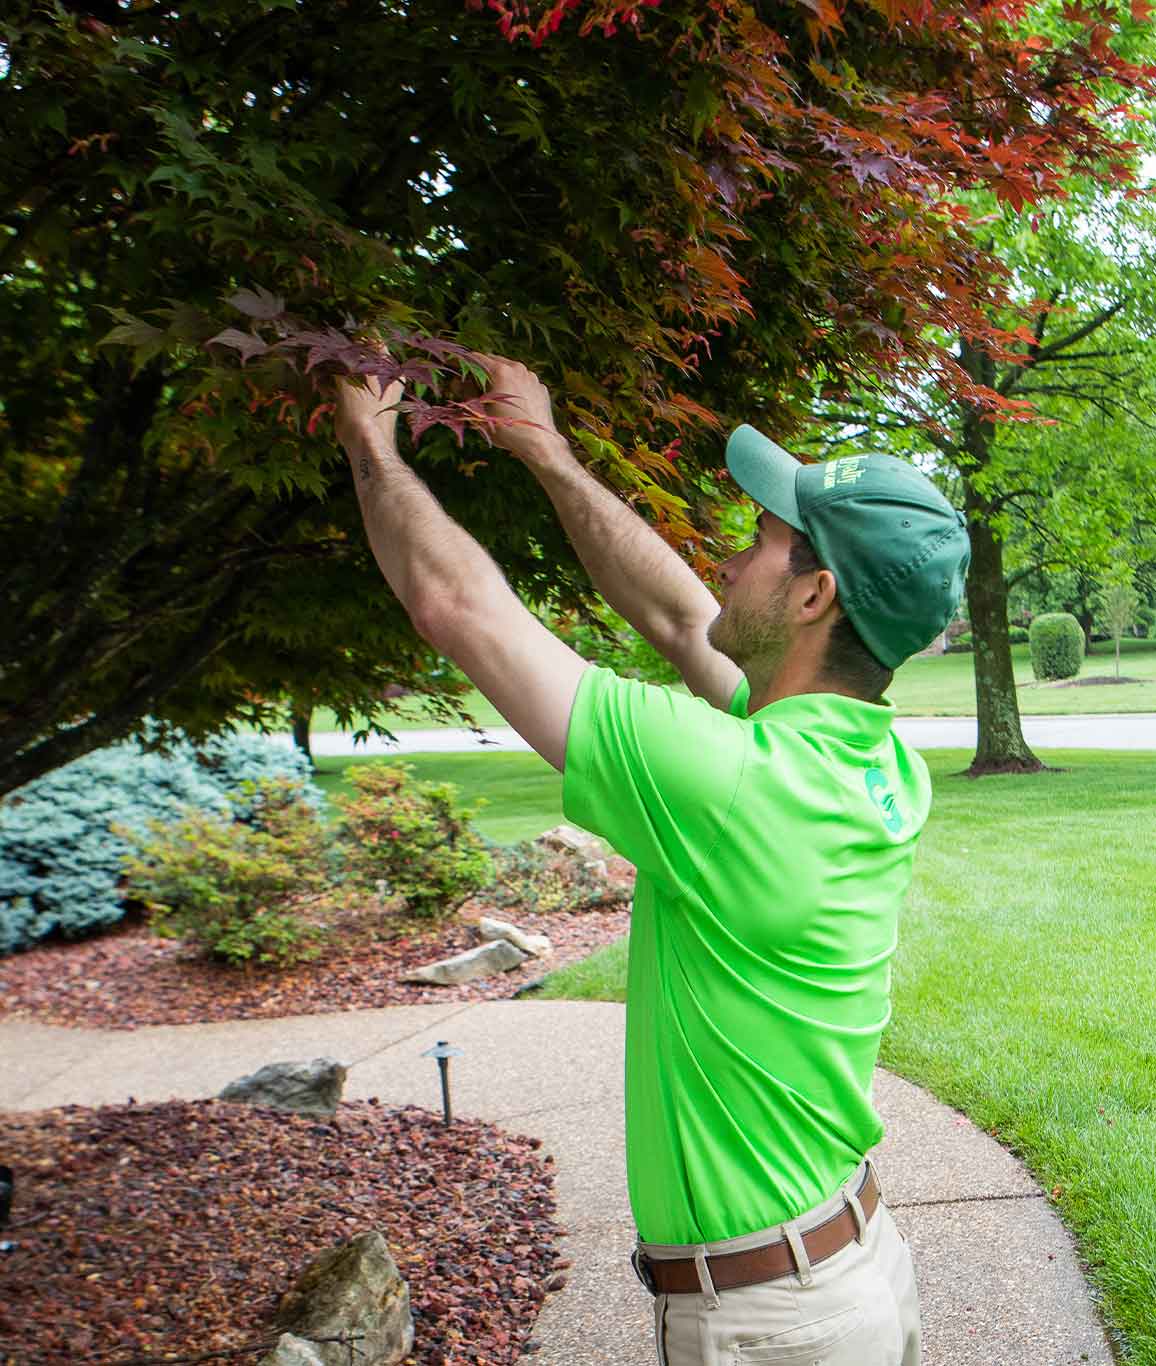 Green group employee trimming a tree